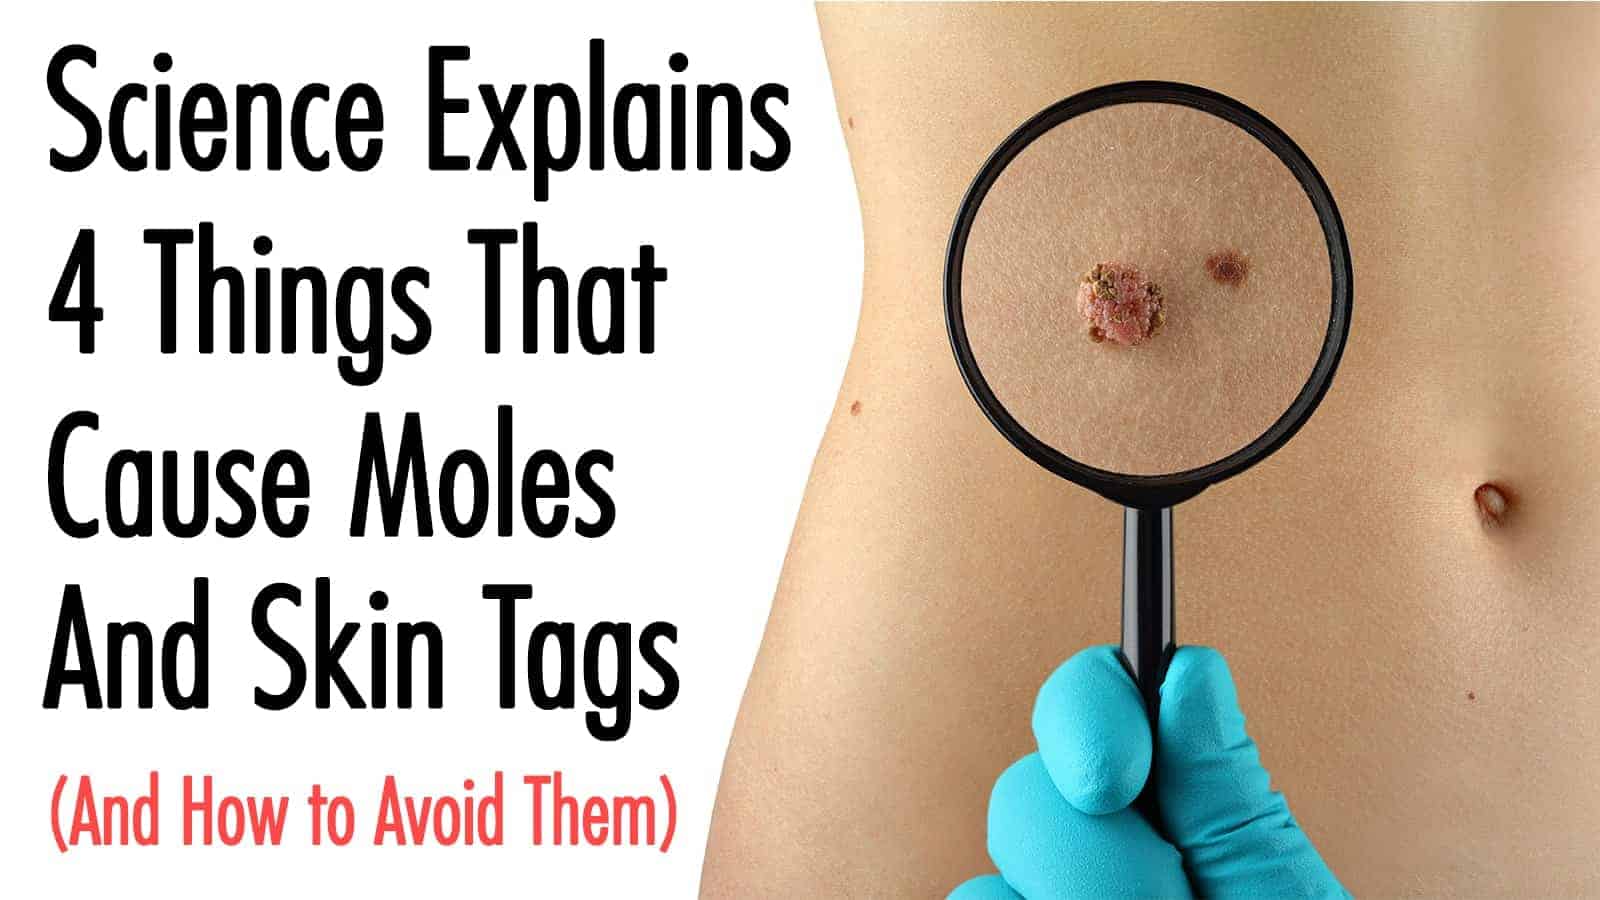 Science Explains 4 Things That Cause Moles And Skin Tags (And How to Avoid Them)